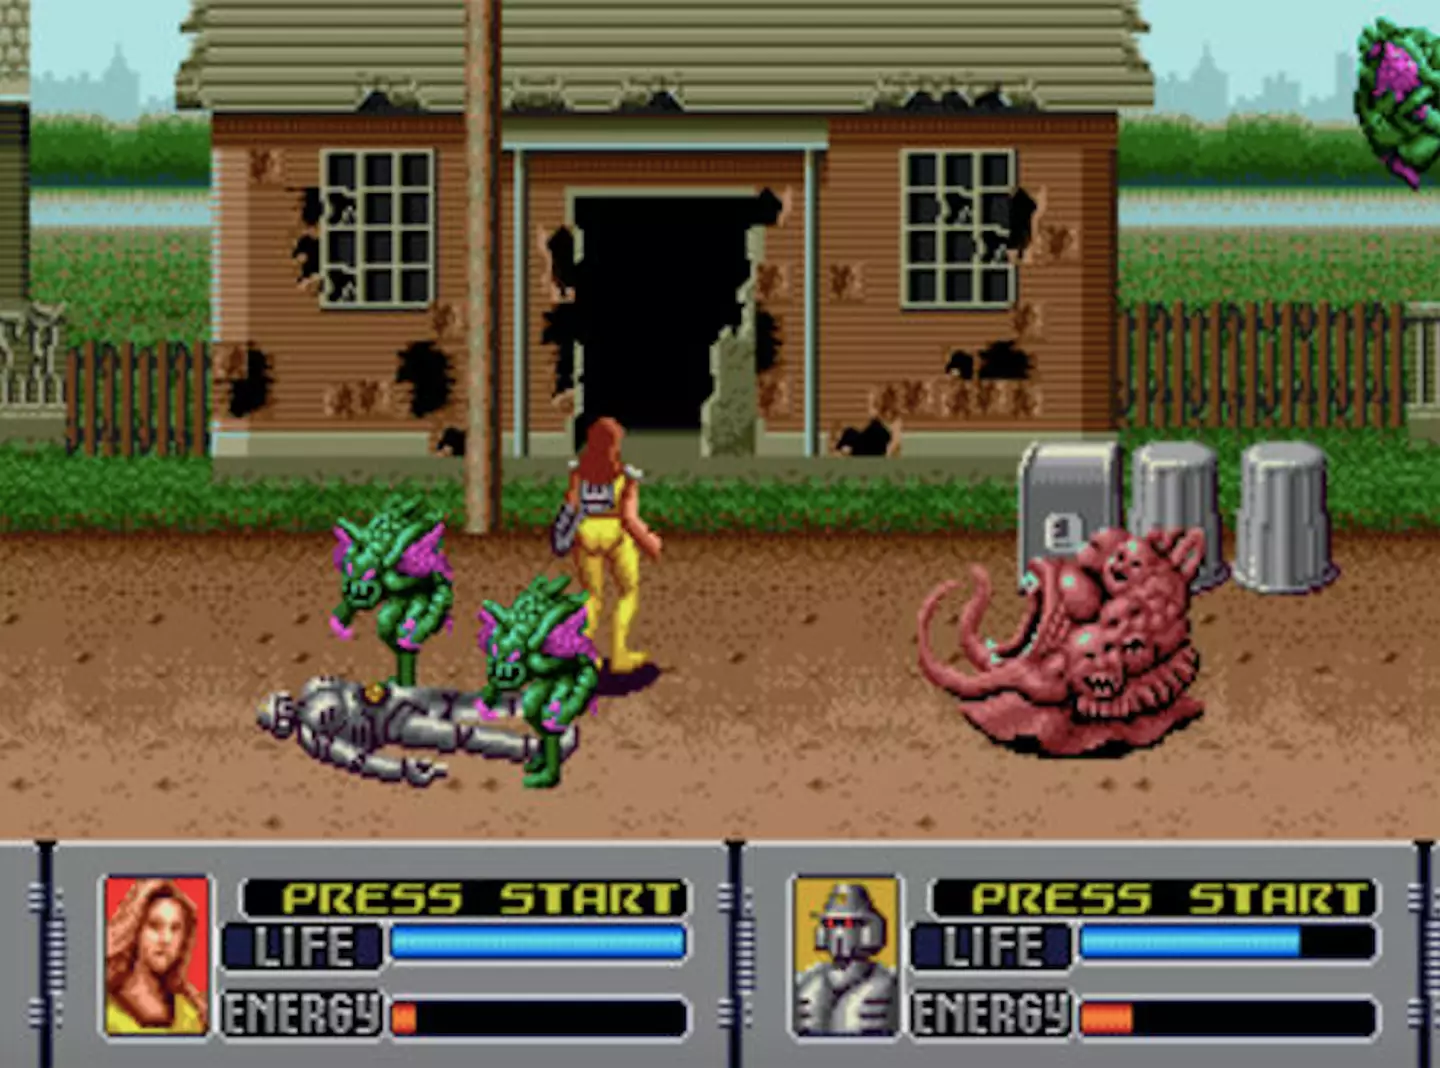 It’s not Streets of Rage good, but Alien Storm is a fun side-scroller with bonus first-person sequences /